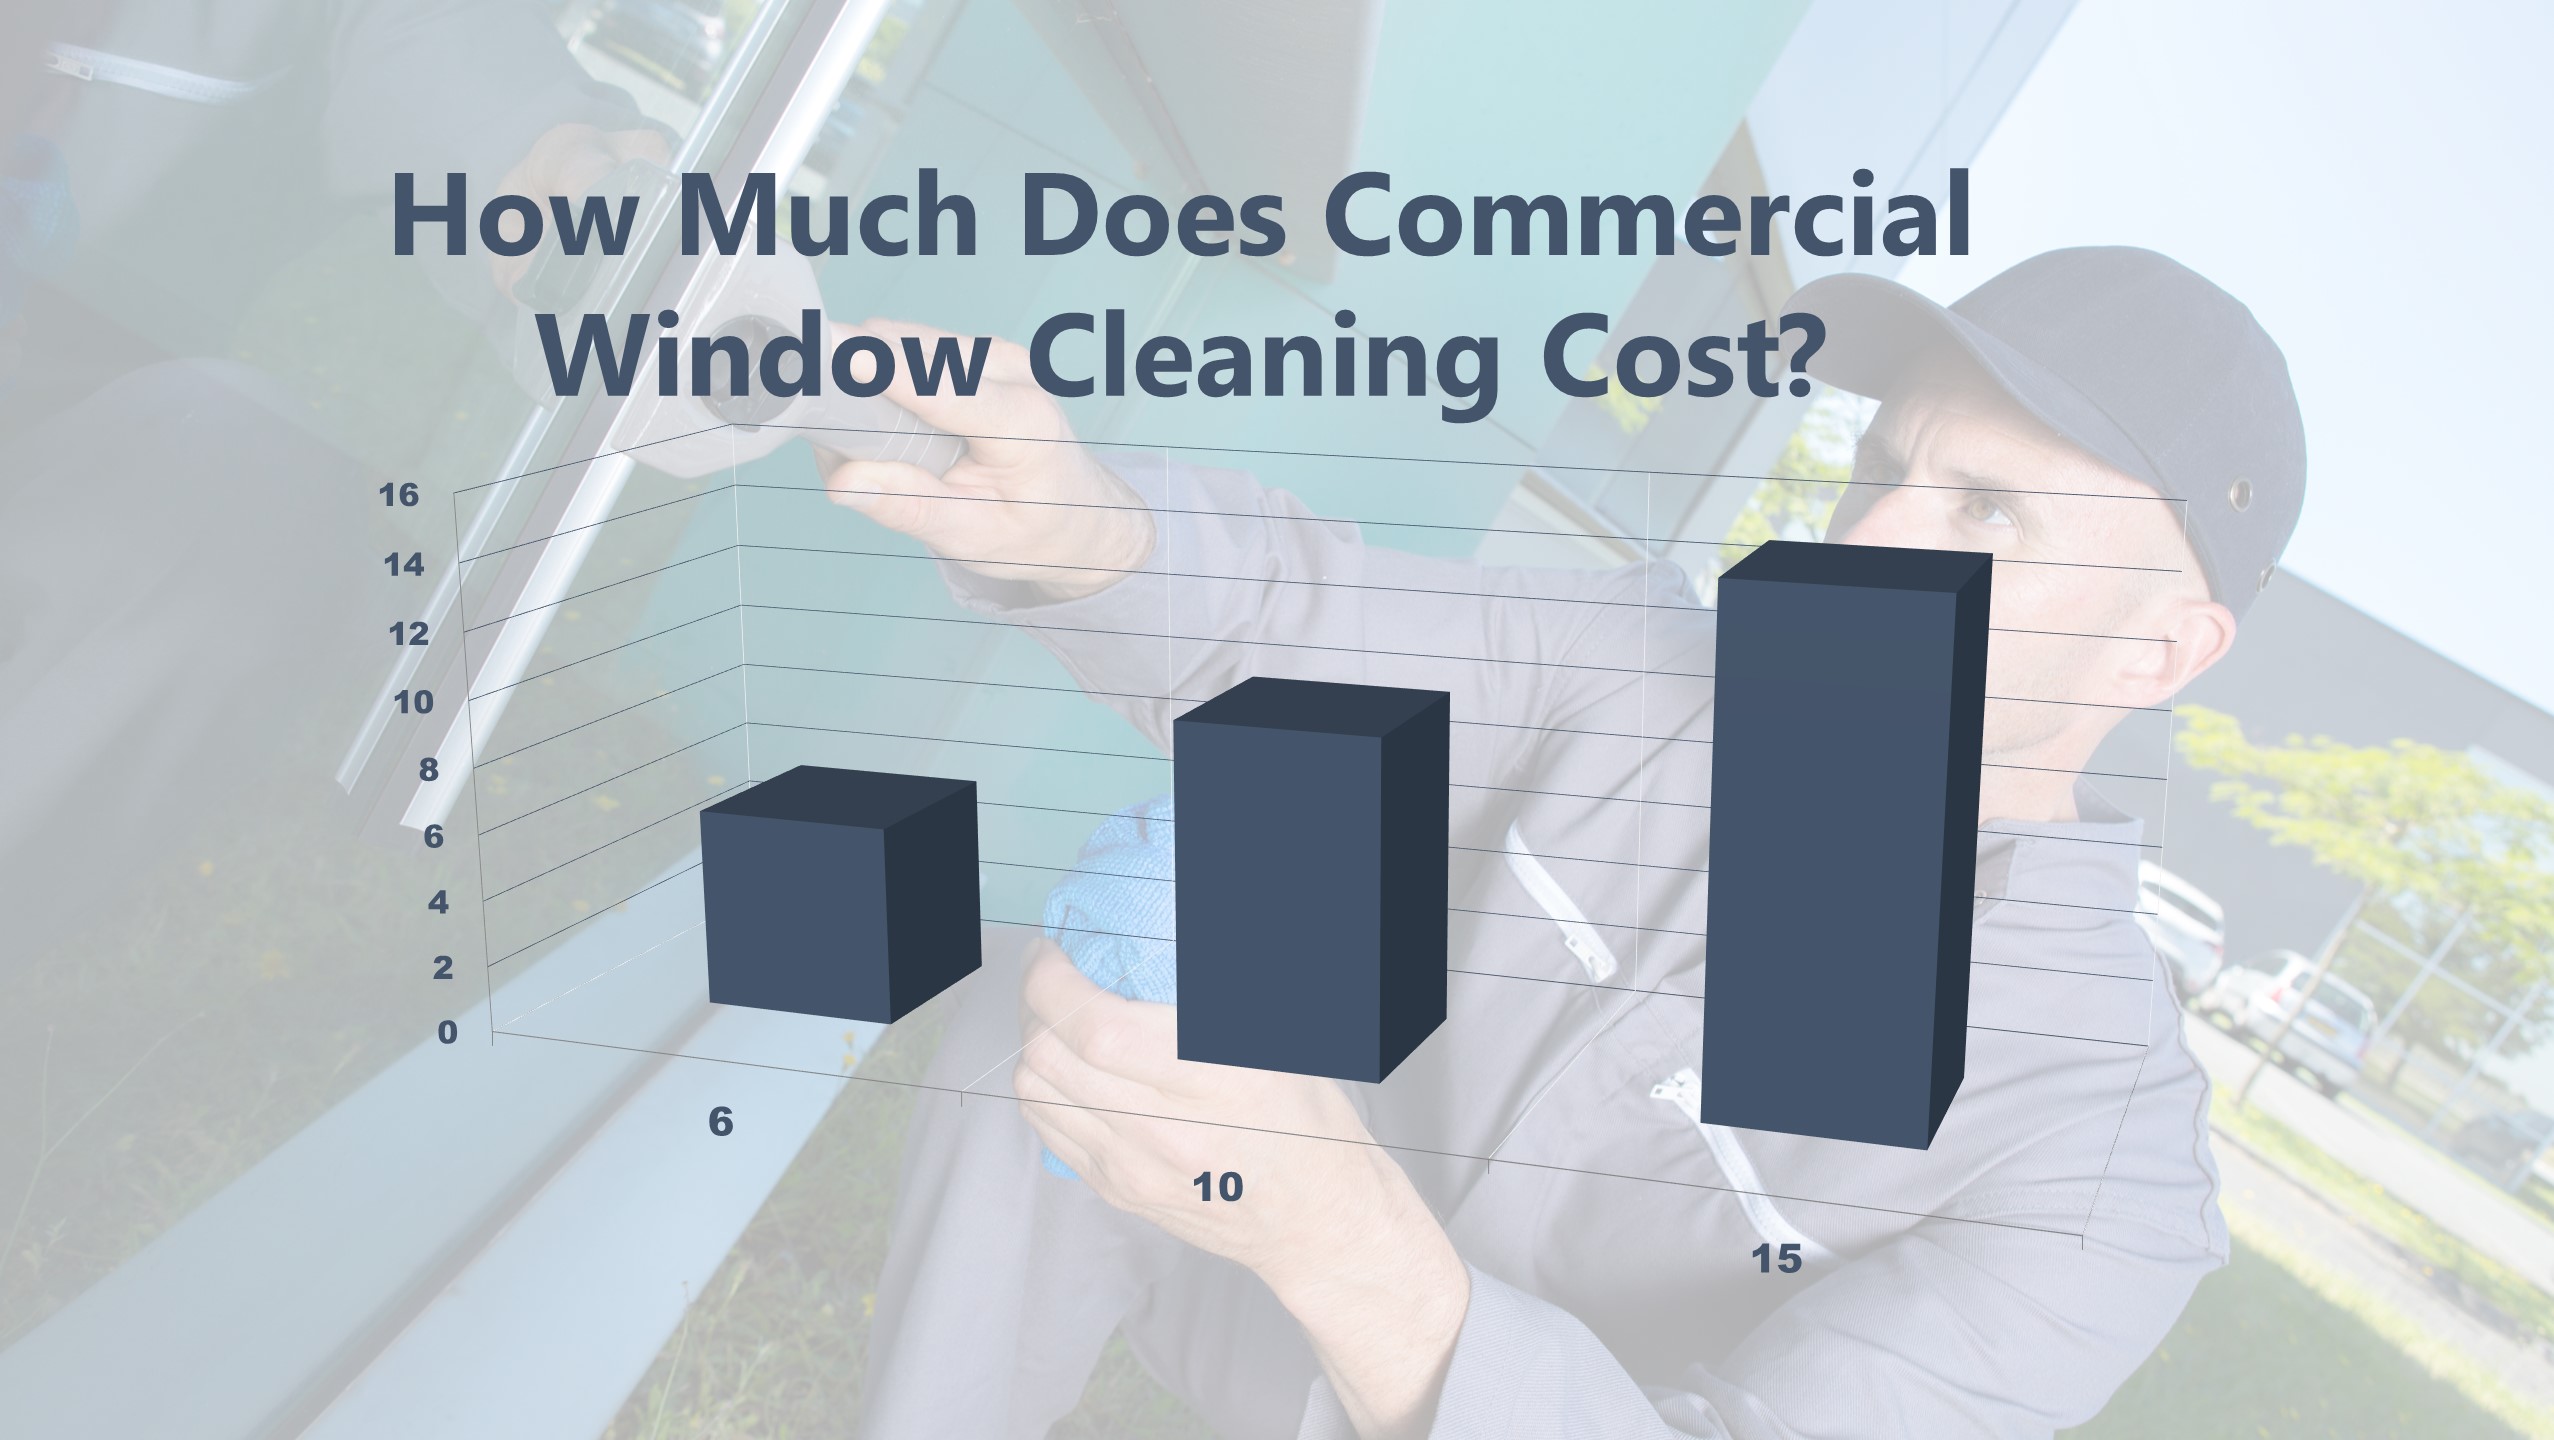 https://desertoasiscleaners.com/wp-content/uploads/2019/04/How-Much-Does-Commercial-Window-Cleaning-Cost.jpg